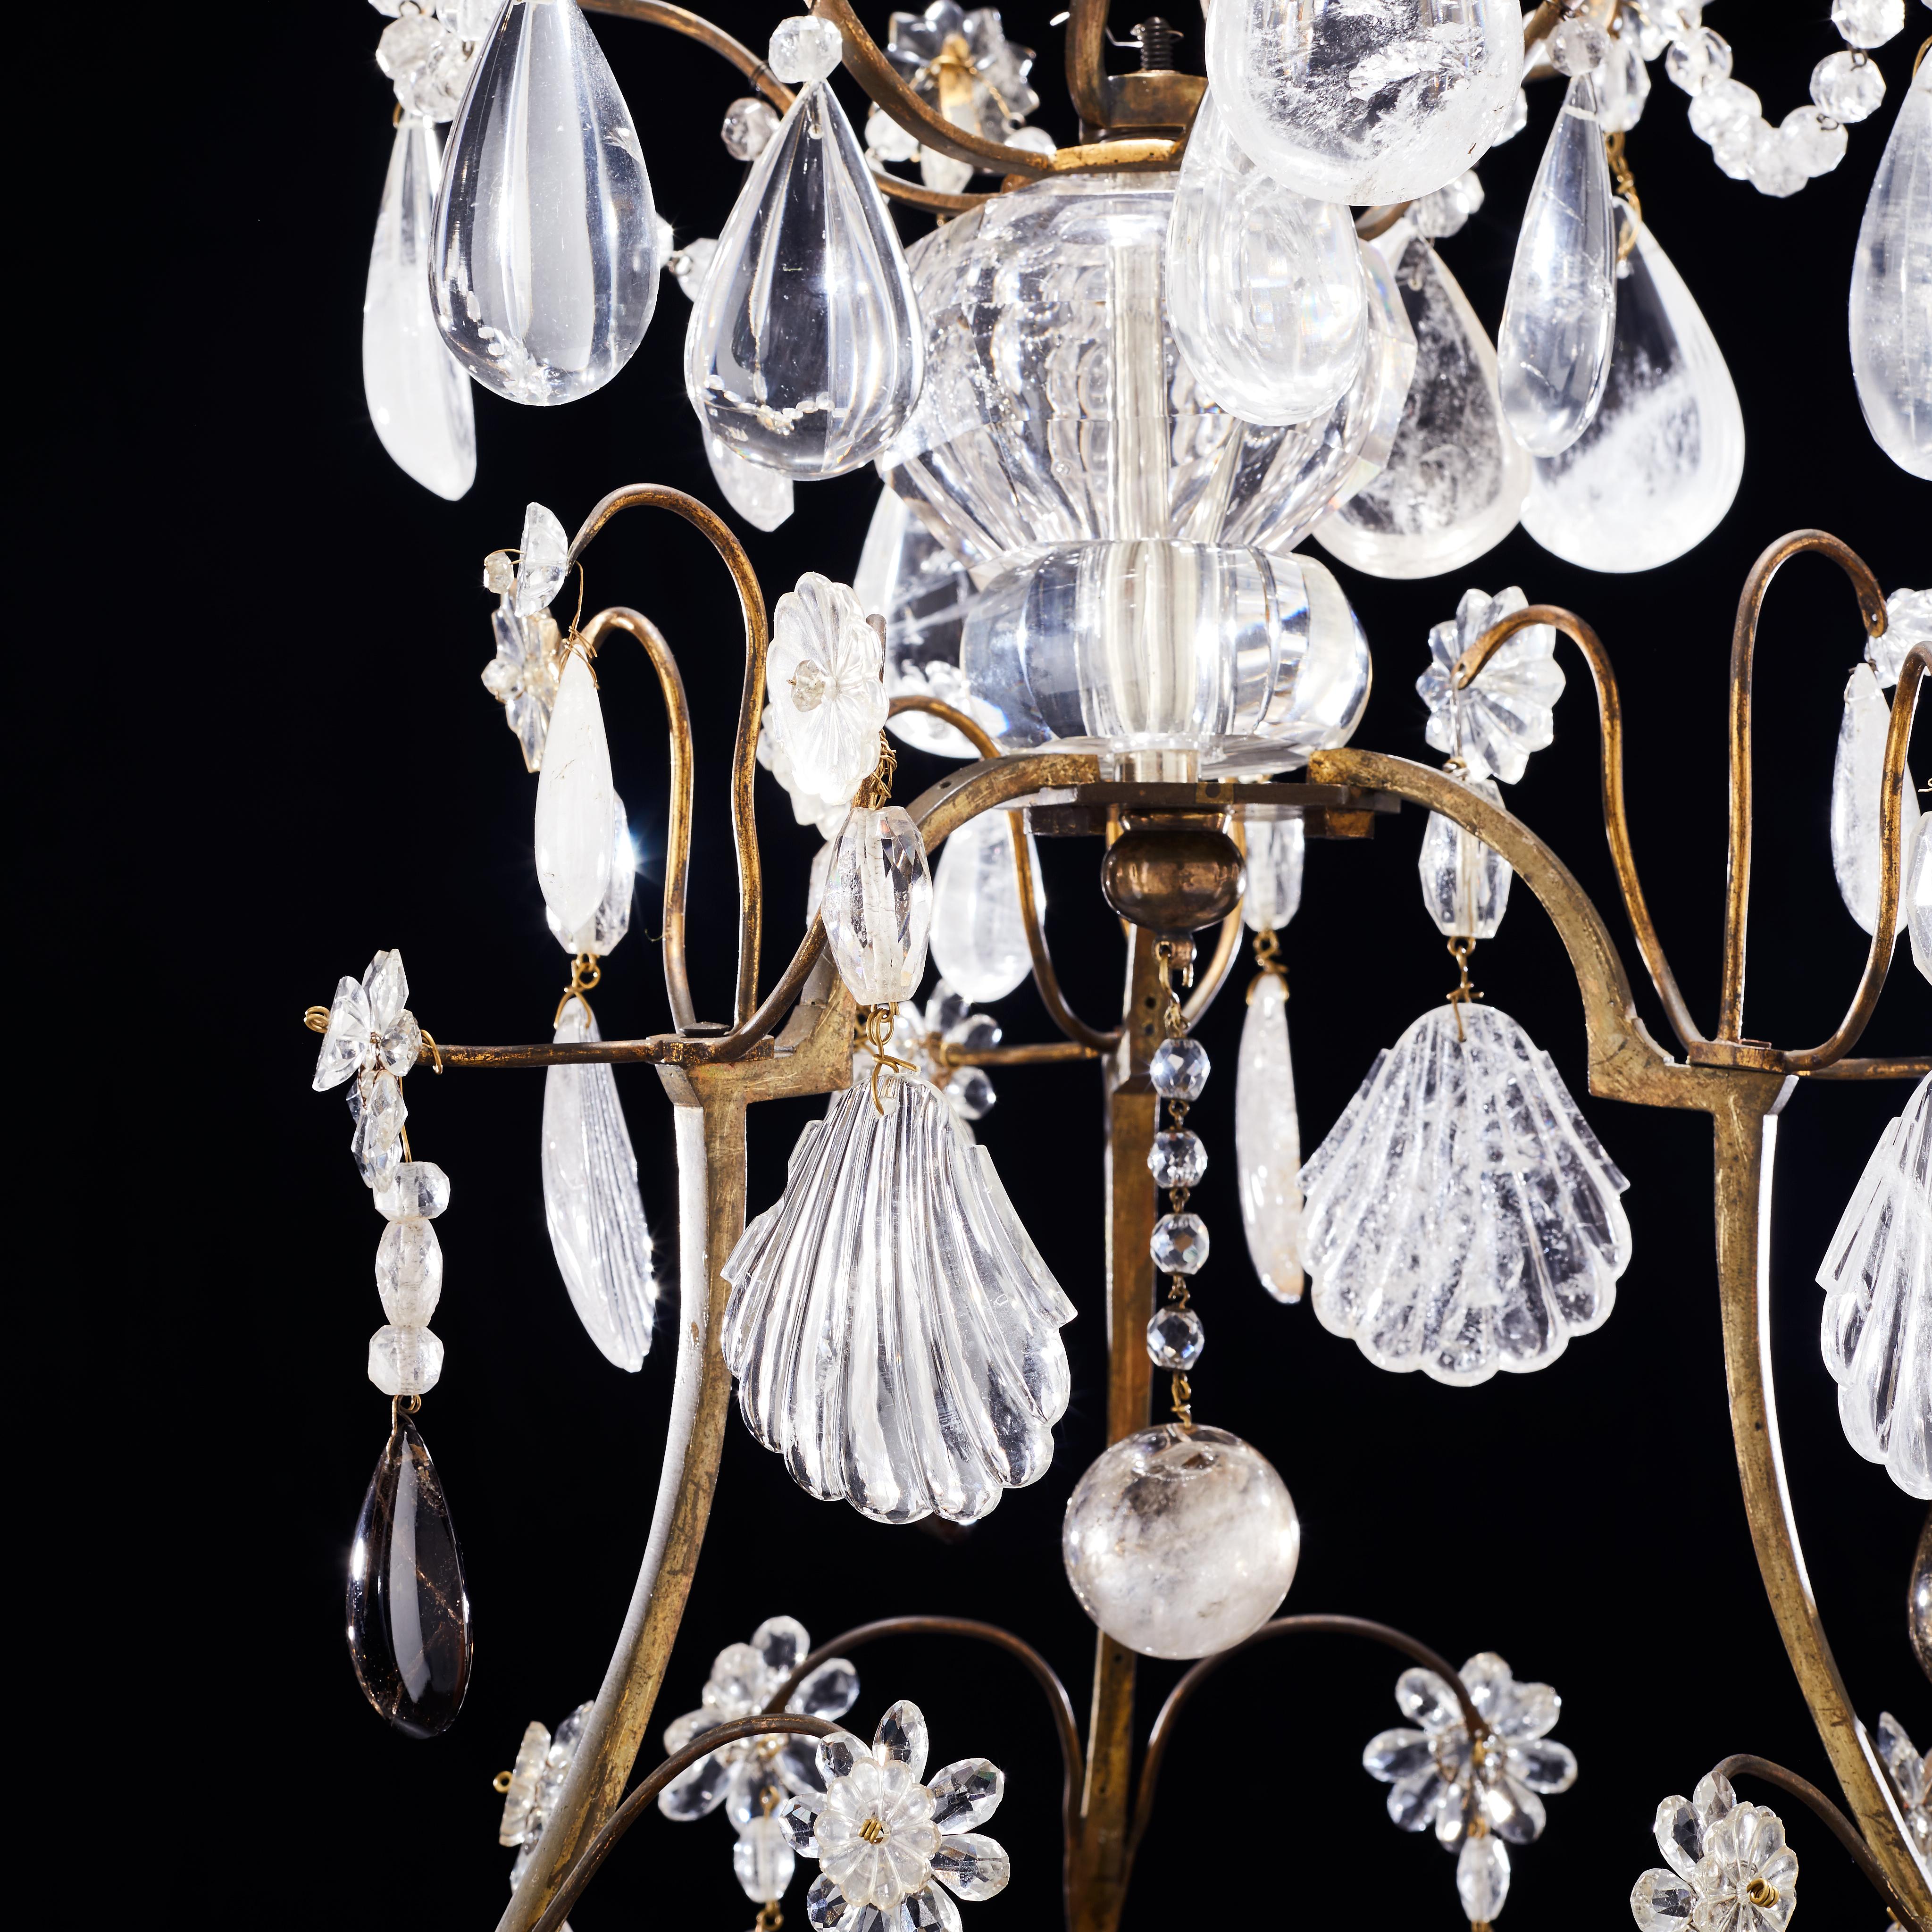 French Gilt-Bronze, Rock Crystal Chandelier in Louis XV Style, 19th Century